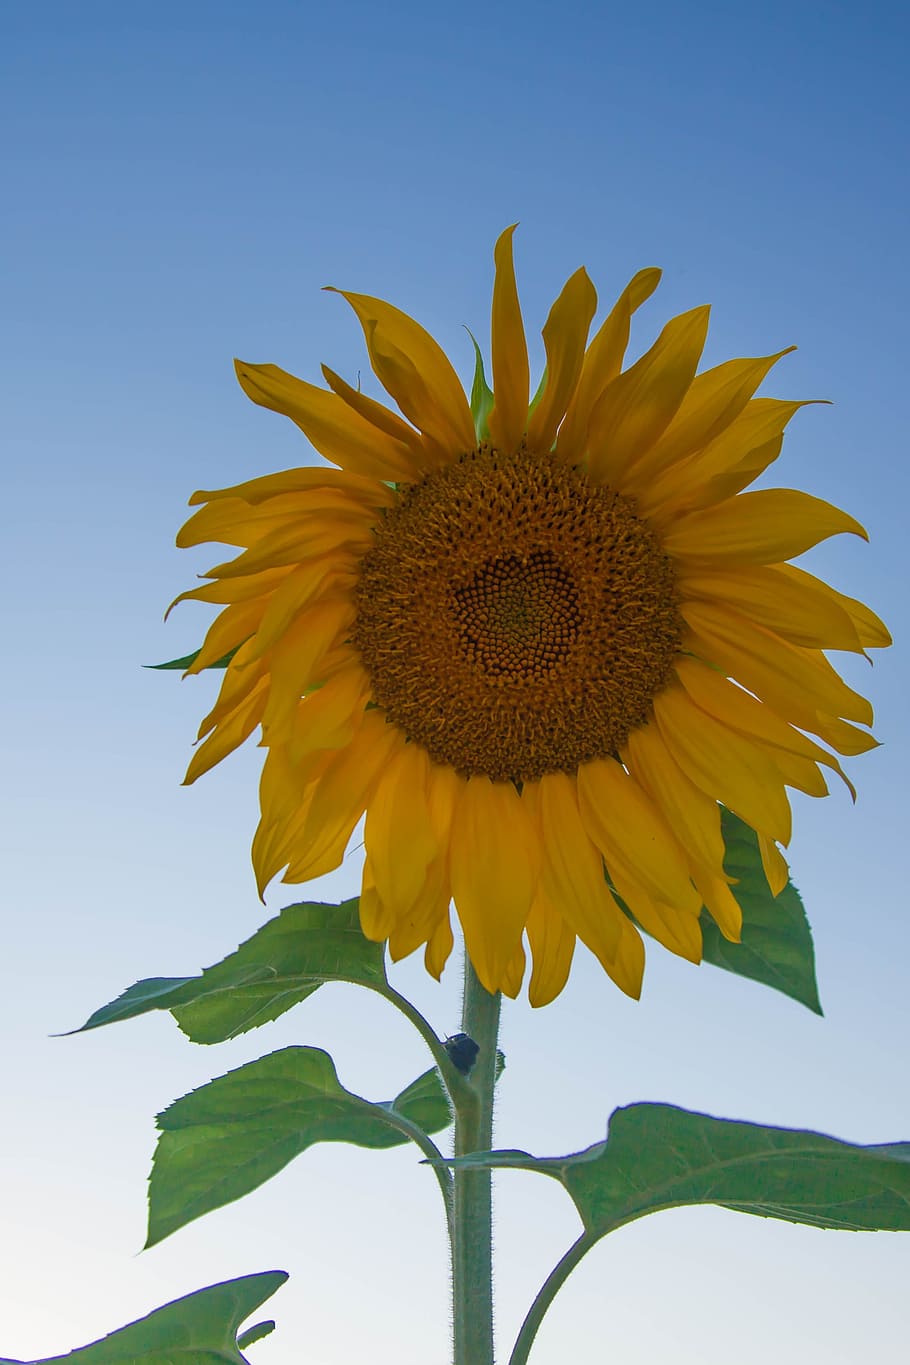 Sunflower, Nature, summer, living nature, yellow, agriculture